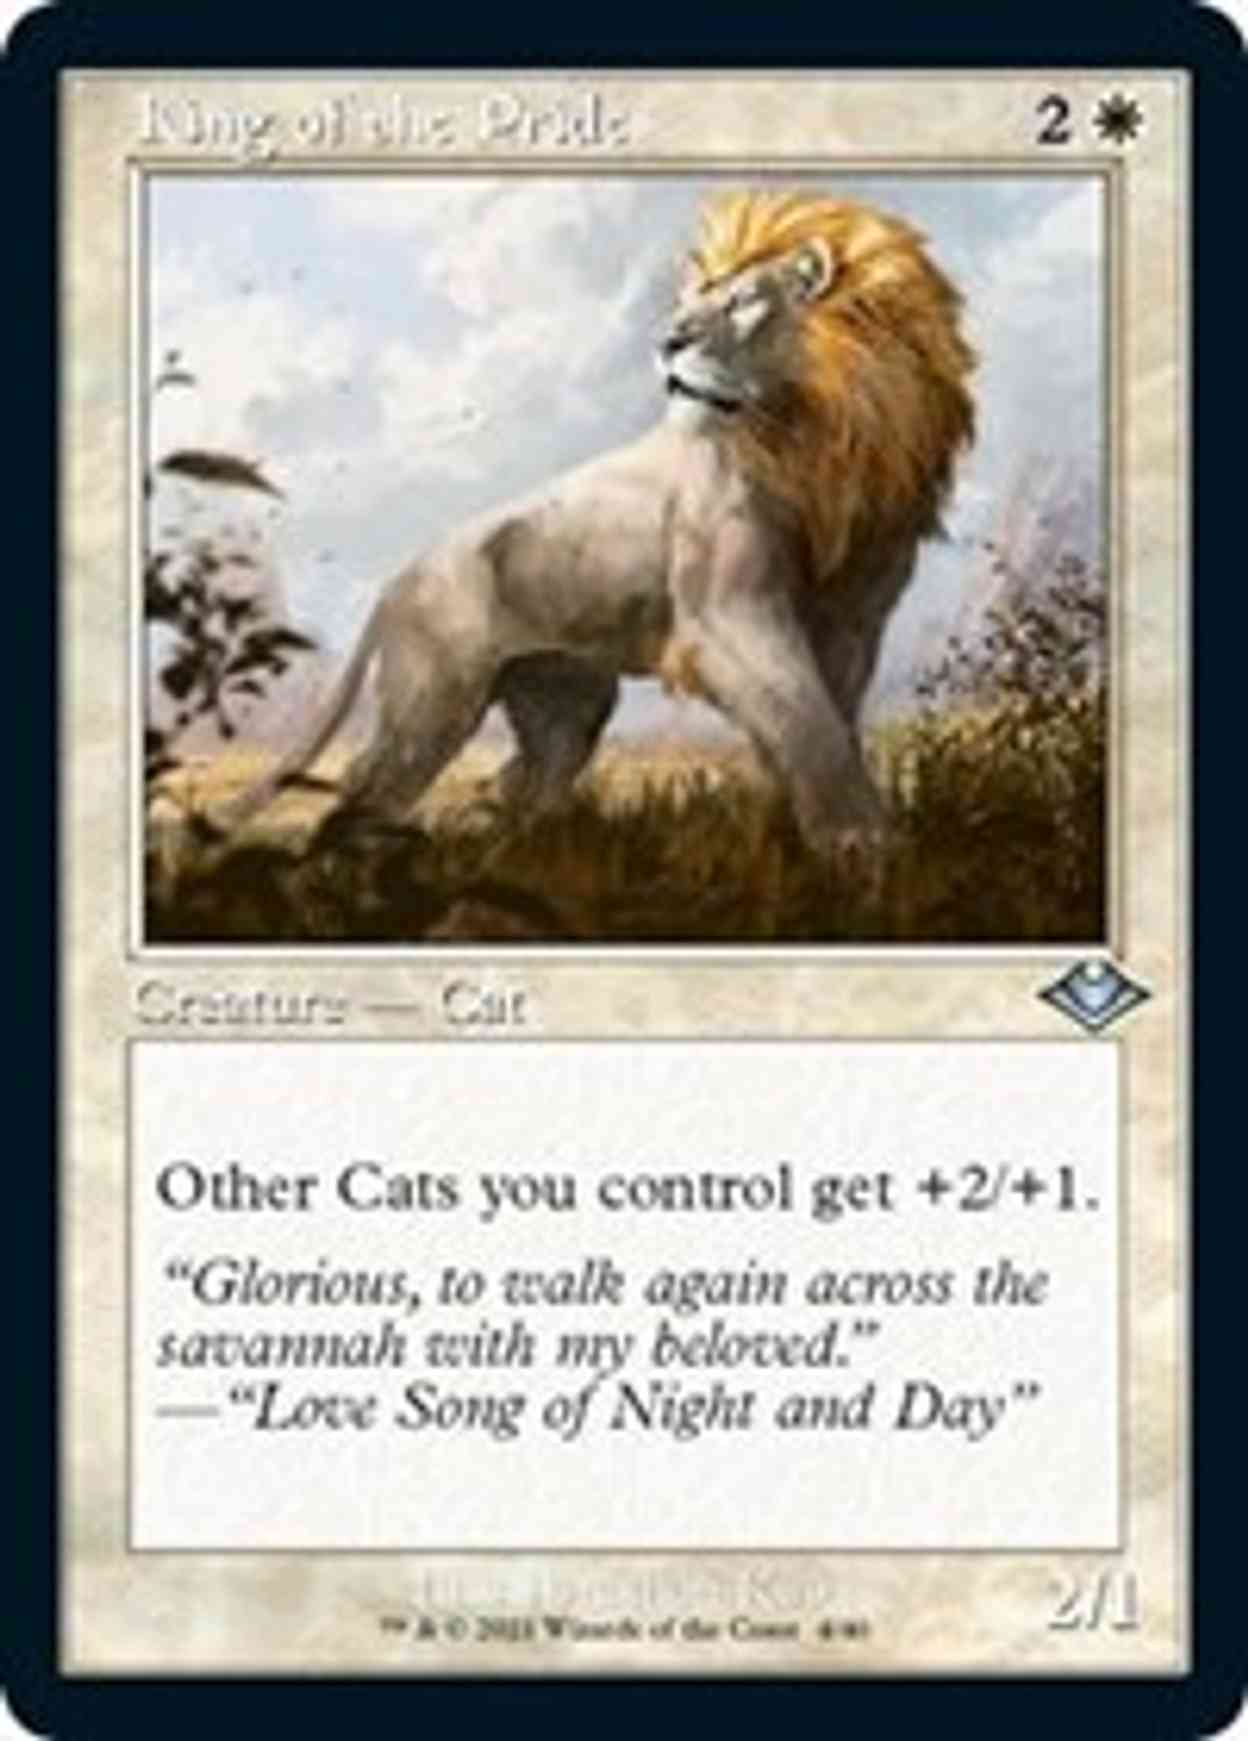 King of the Pride (Retro Frame) (Foil Etched) magic card front